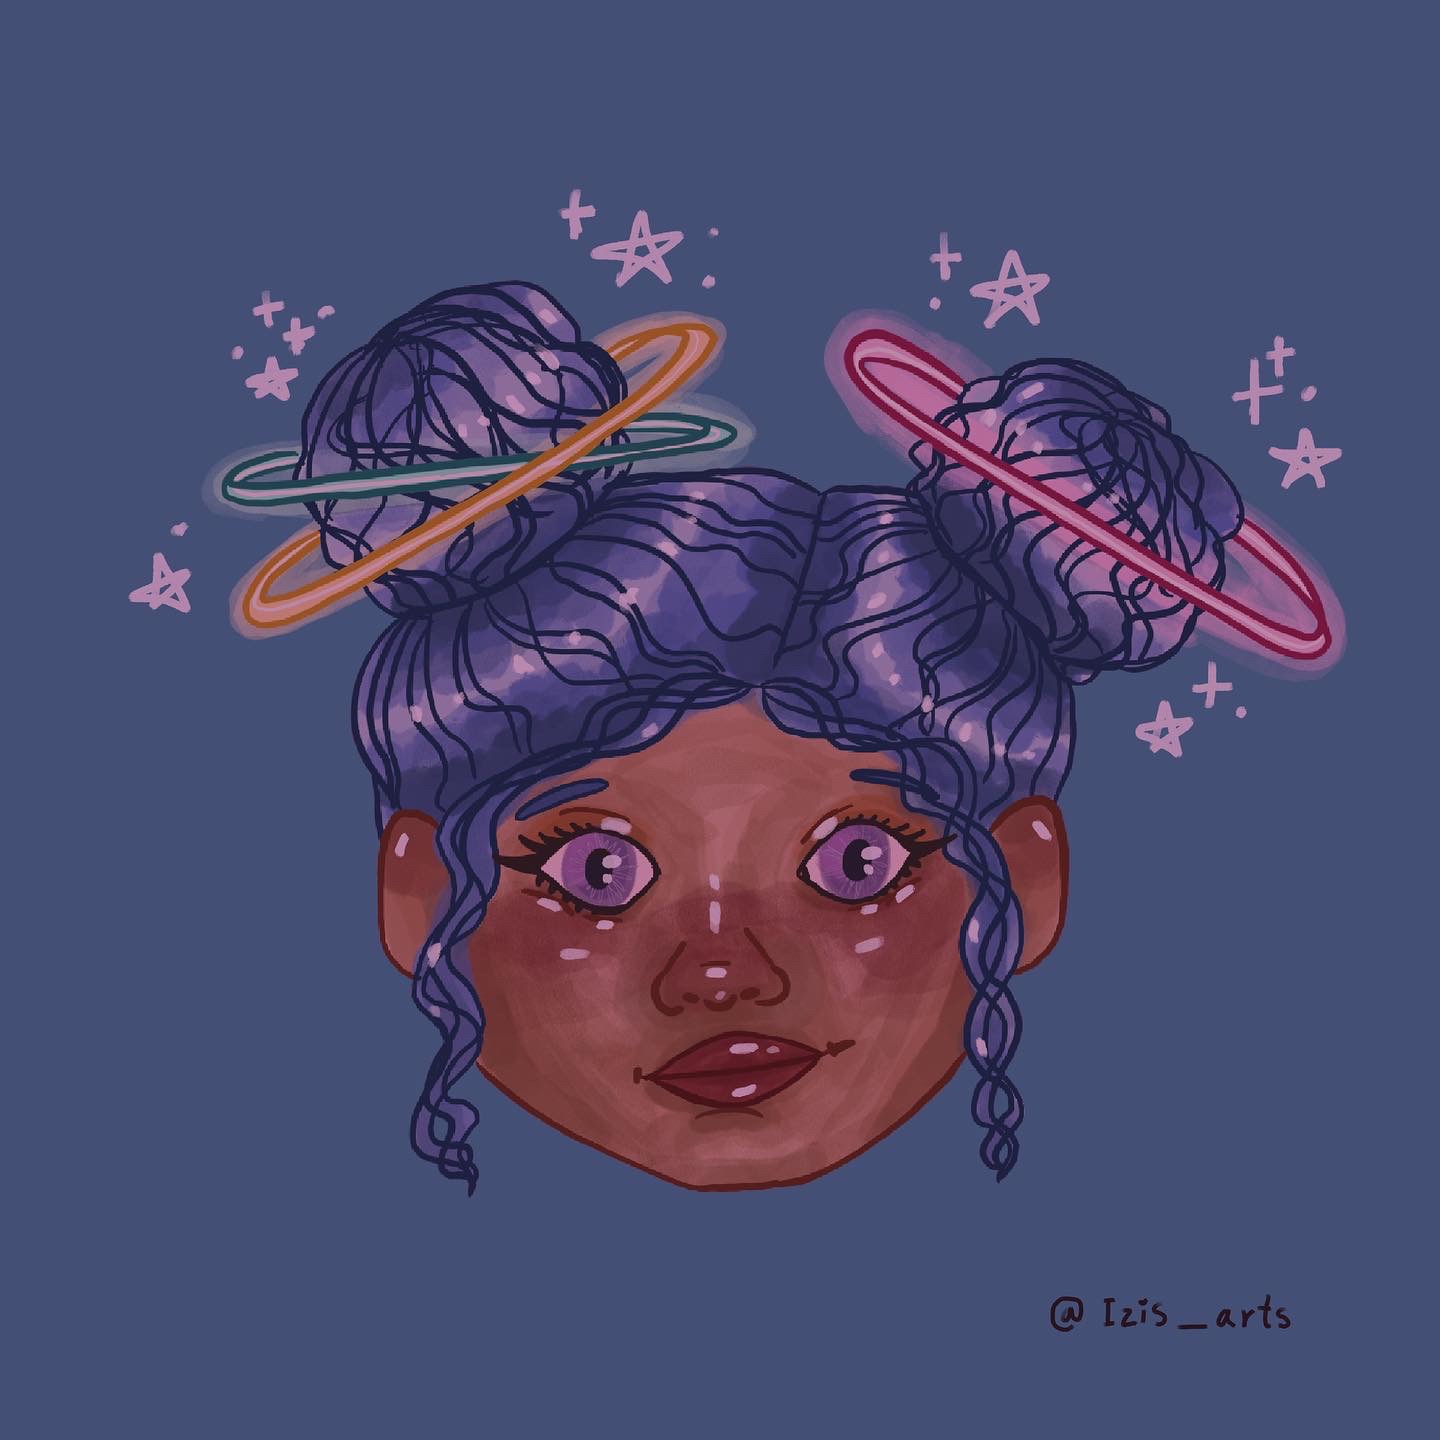 digital art of girl with space buns that look like planets. haha get it SPACE buns